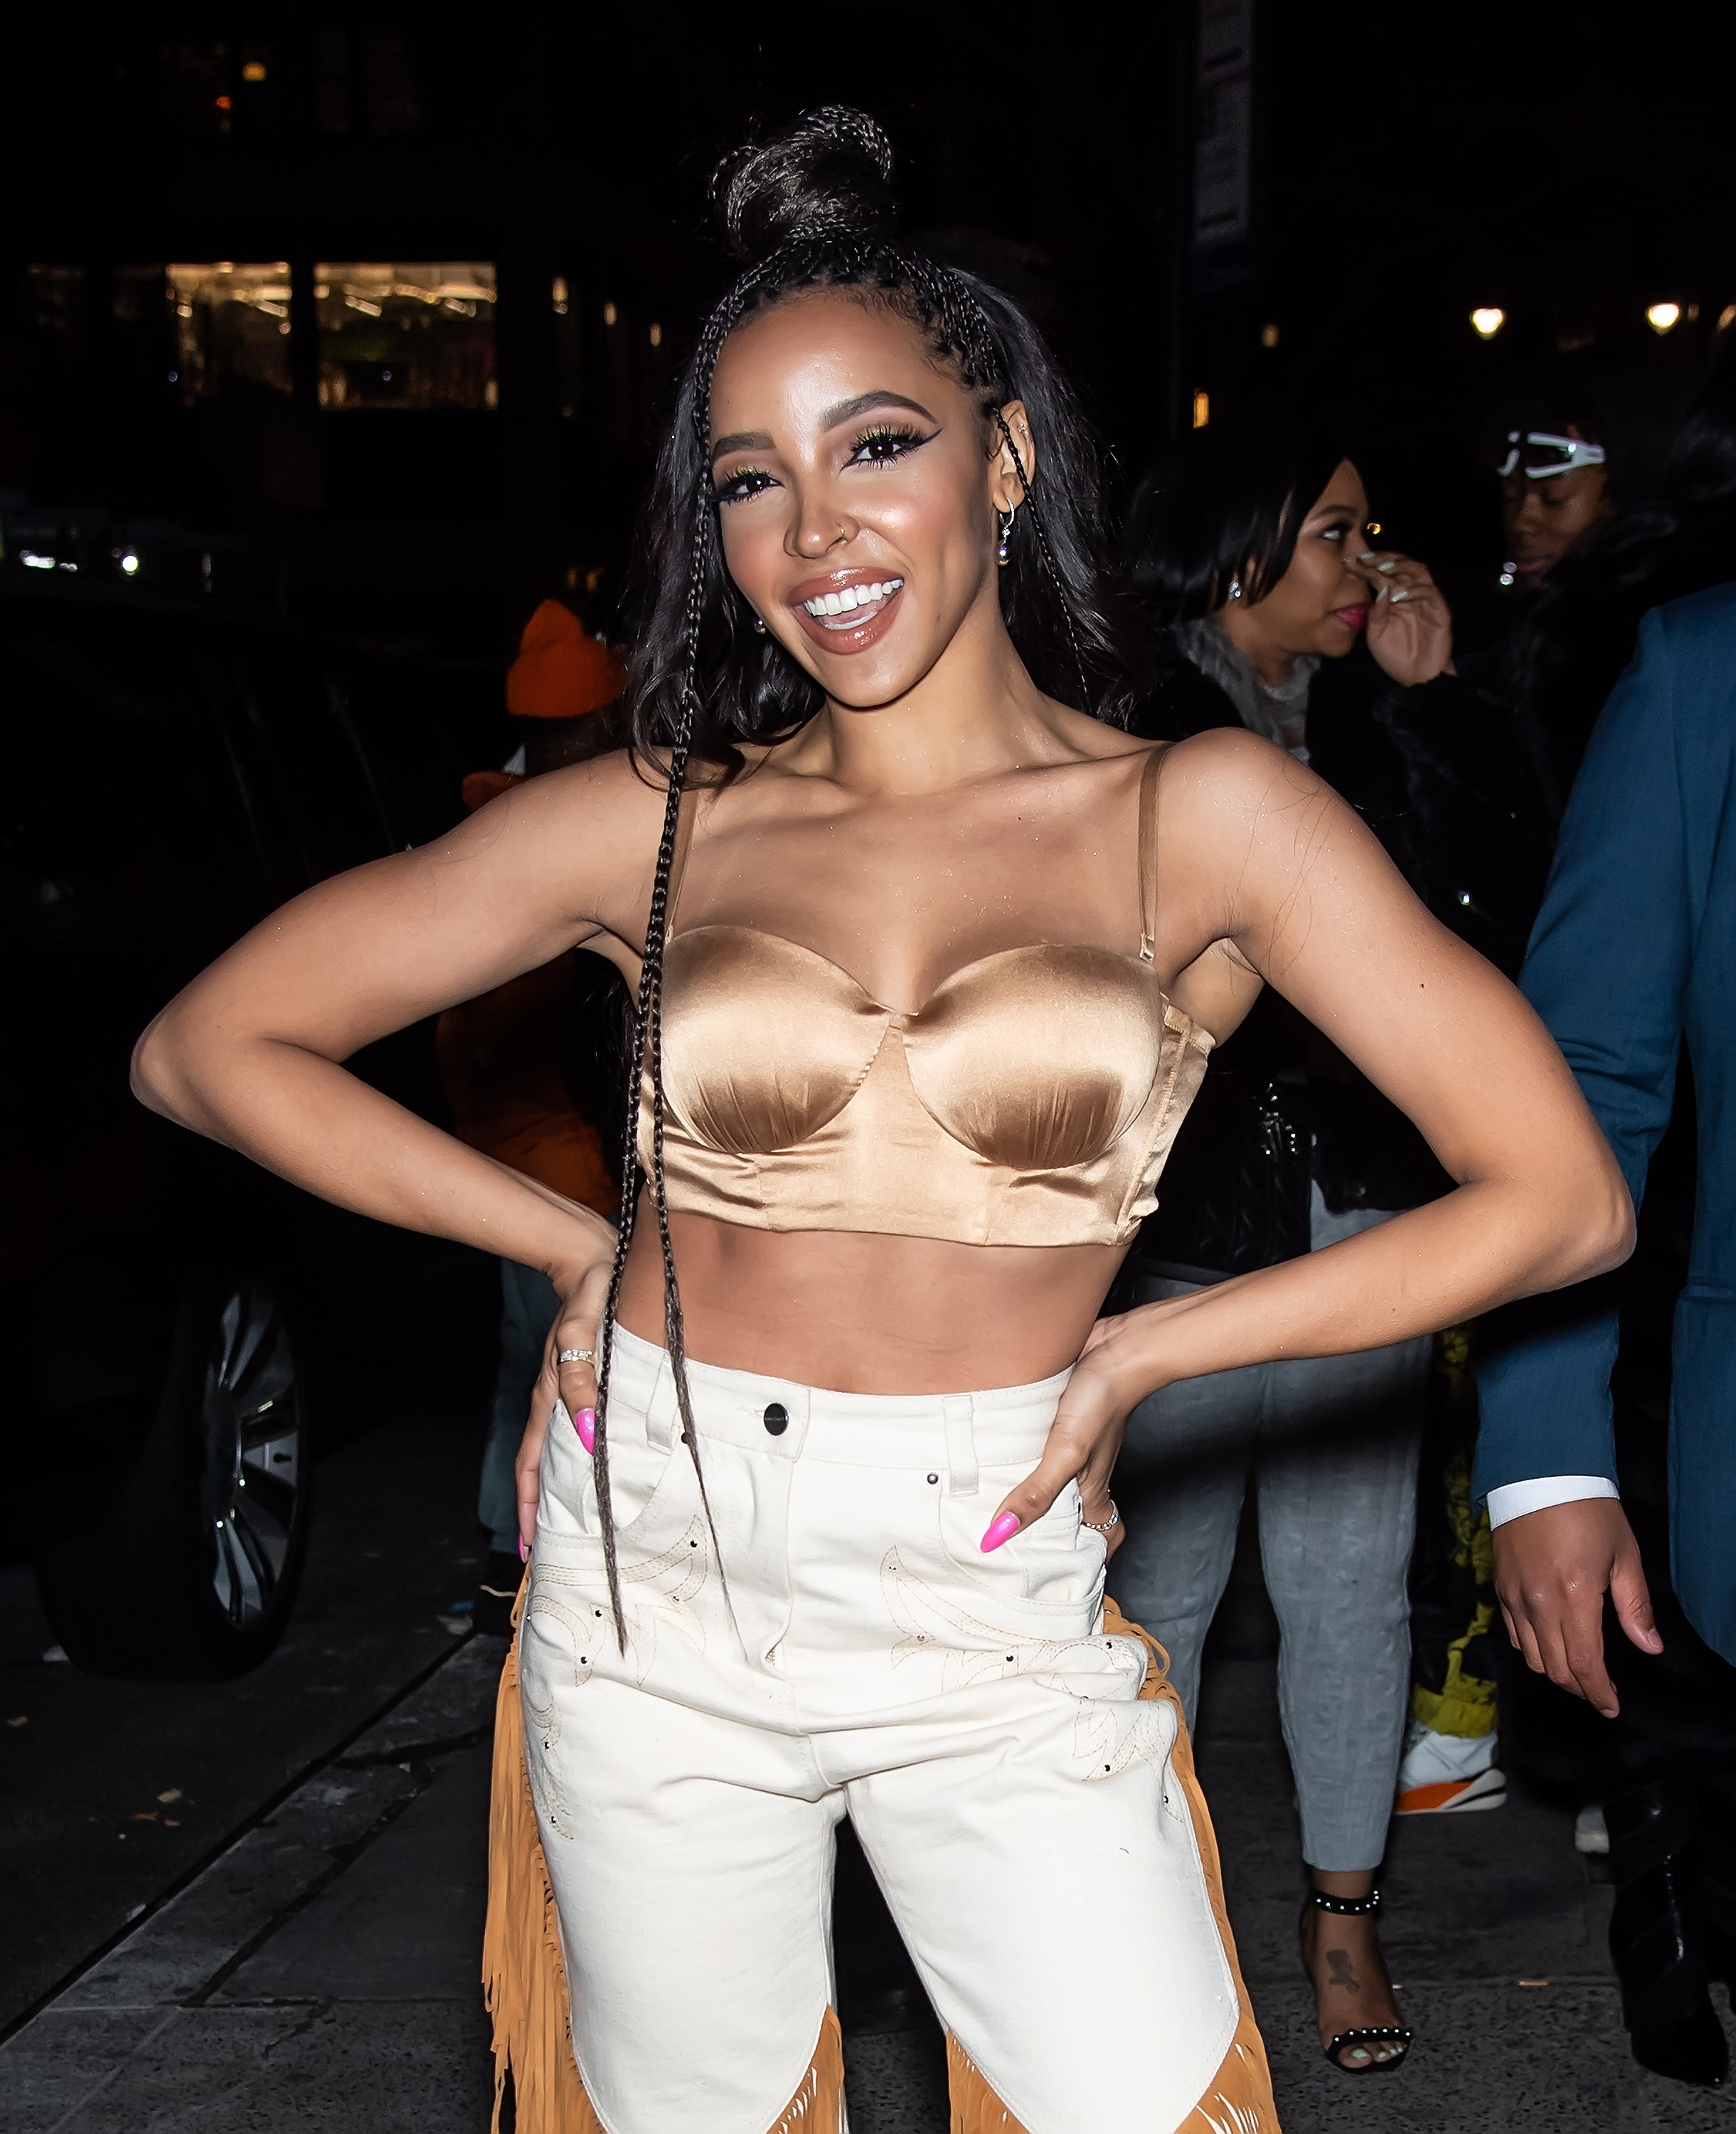 Tinashe outside a club in a bustier top and fringe white cowboy jeans